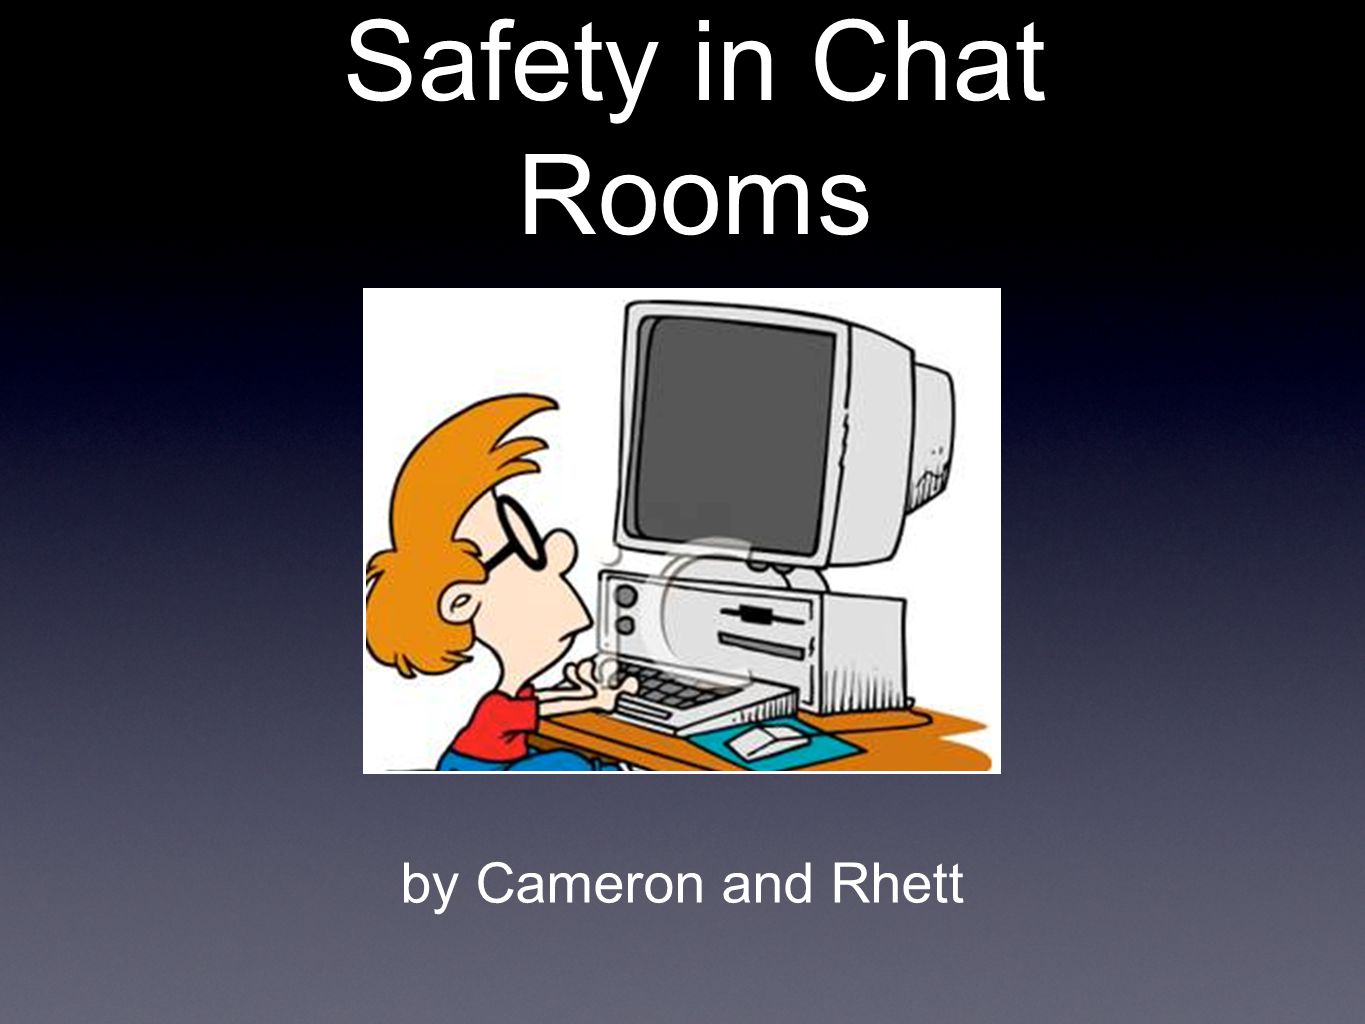 Safety in Chat Rooms by Cameron and Rhett